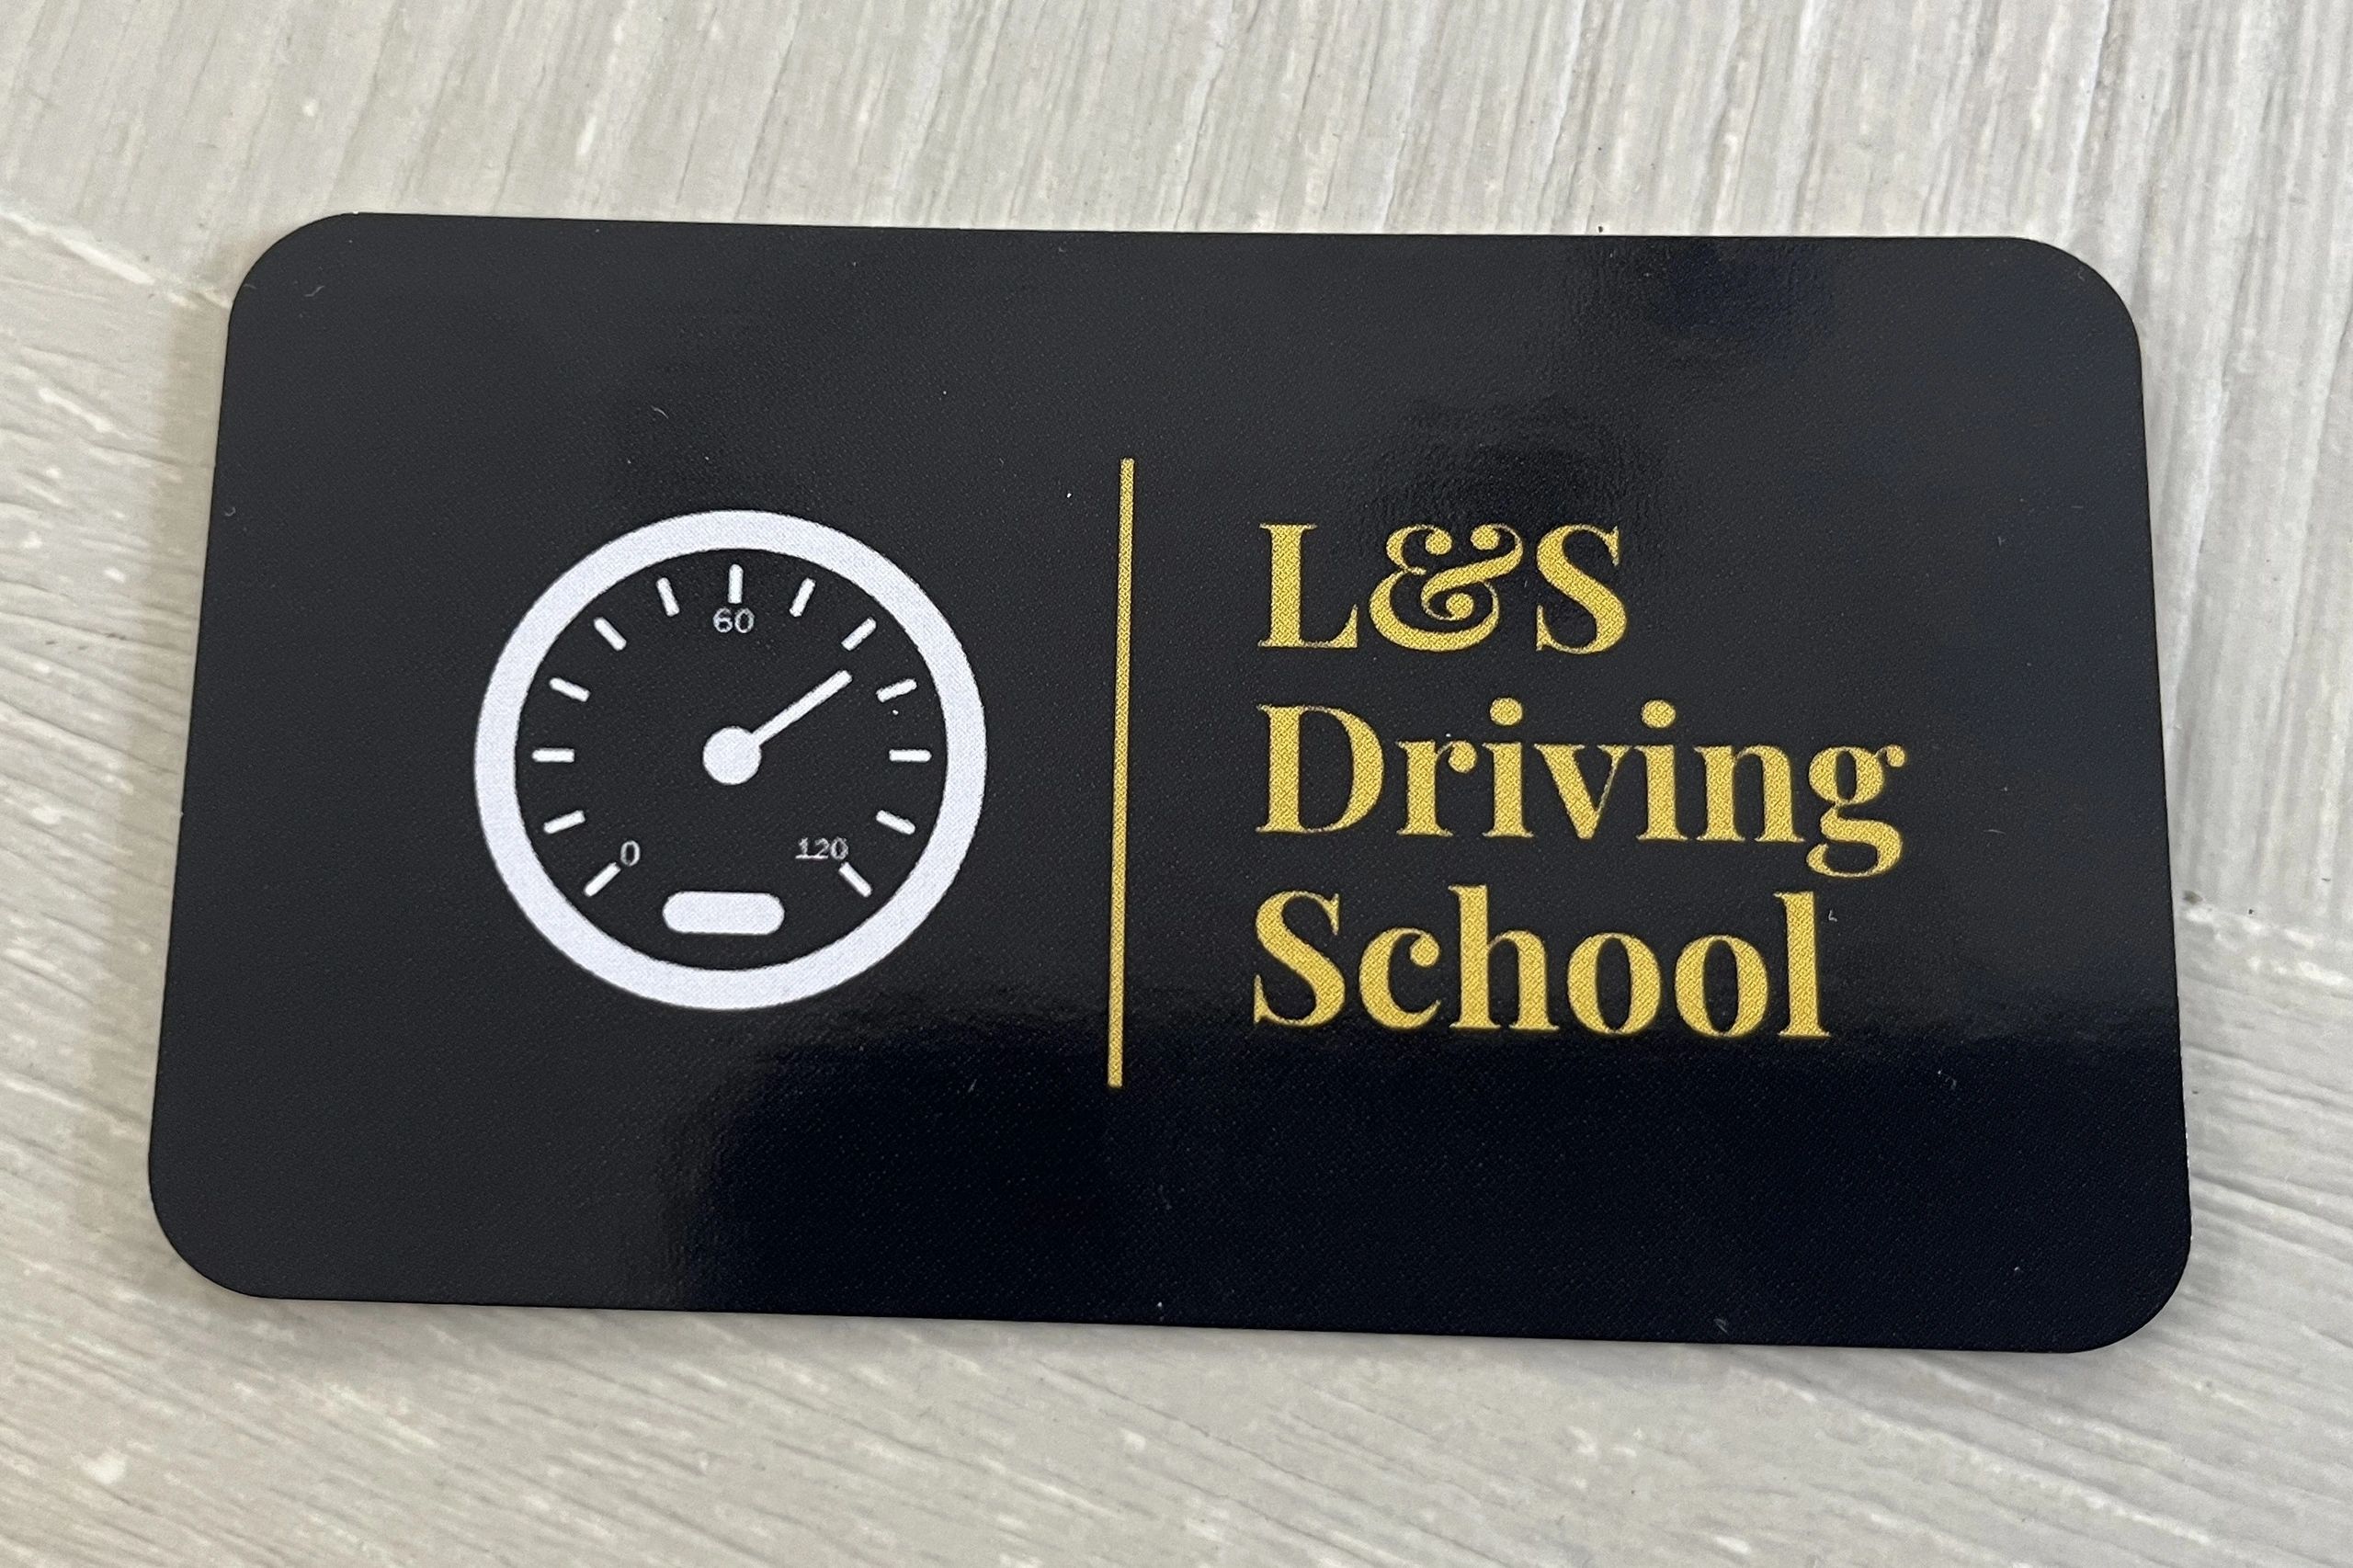 L&S Driving School business card. Black card with the business name in gold lettering.